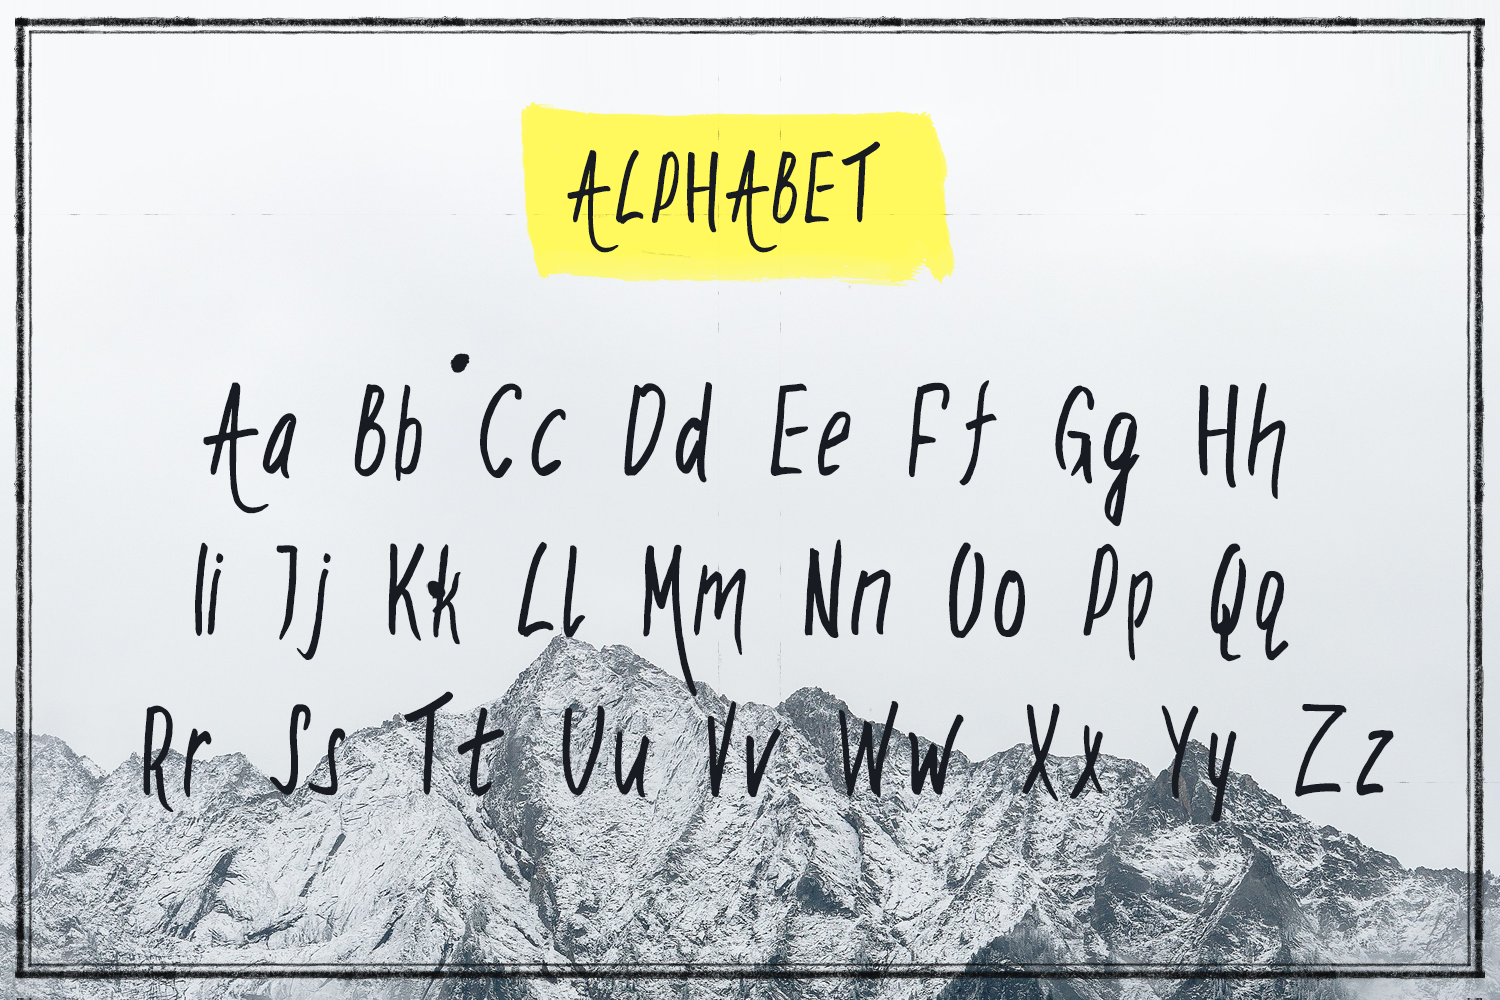 Alphabet using font is provided.